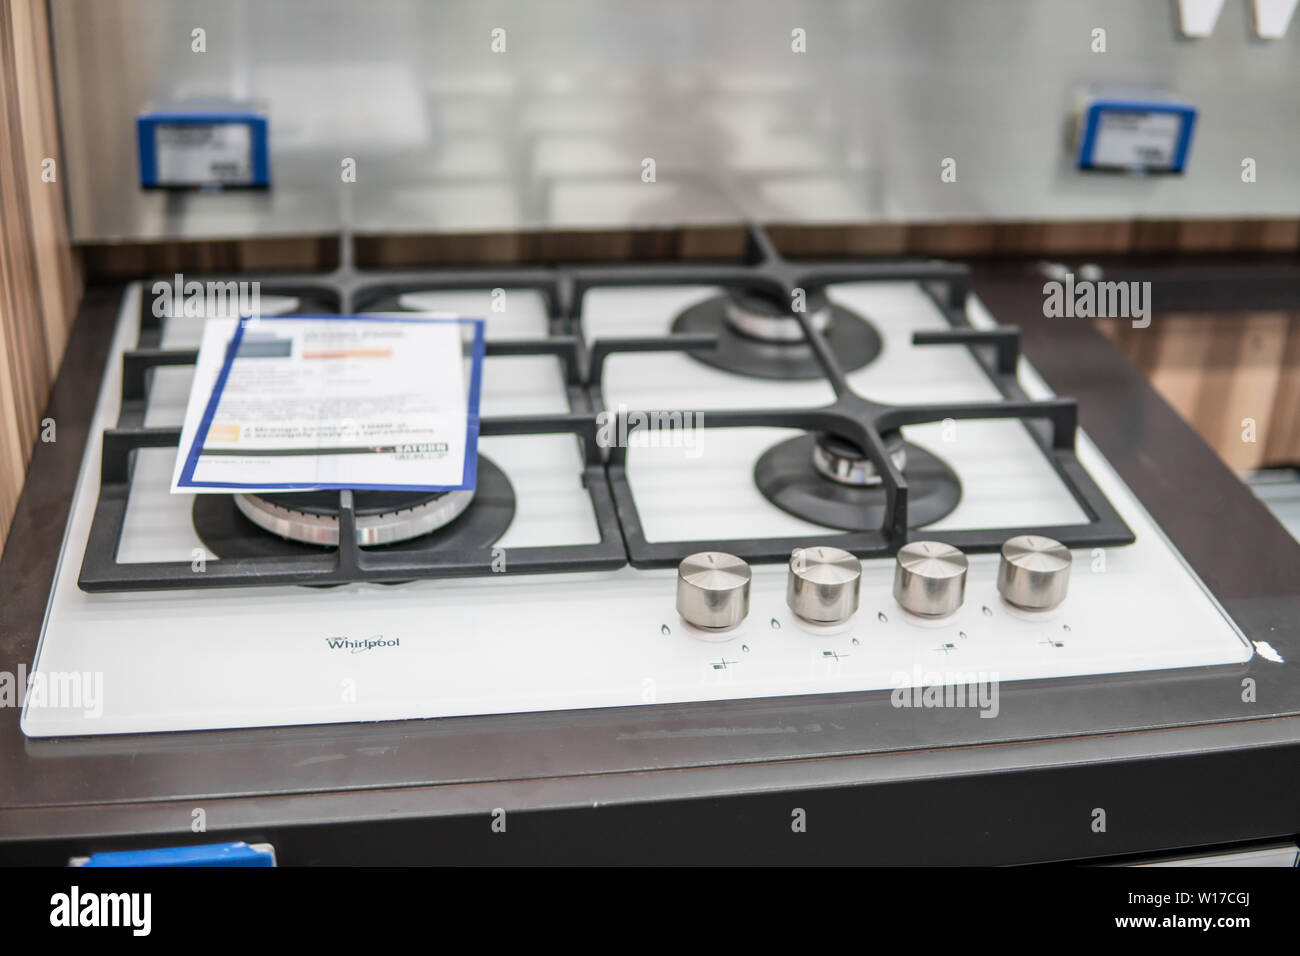 Lodz, Poland, July 2018 inside Saturn electronic store, Whirlpool gas hobs produced by Whirlpool Corporation American manufacturer of home appliances Stock Photo